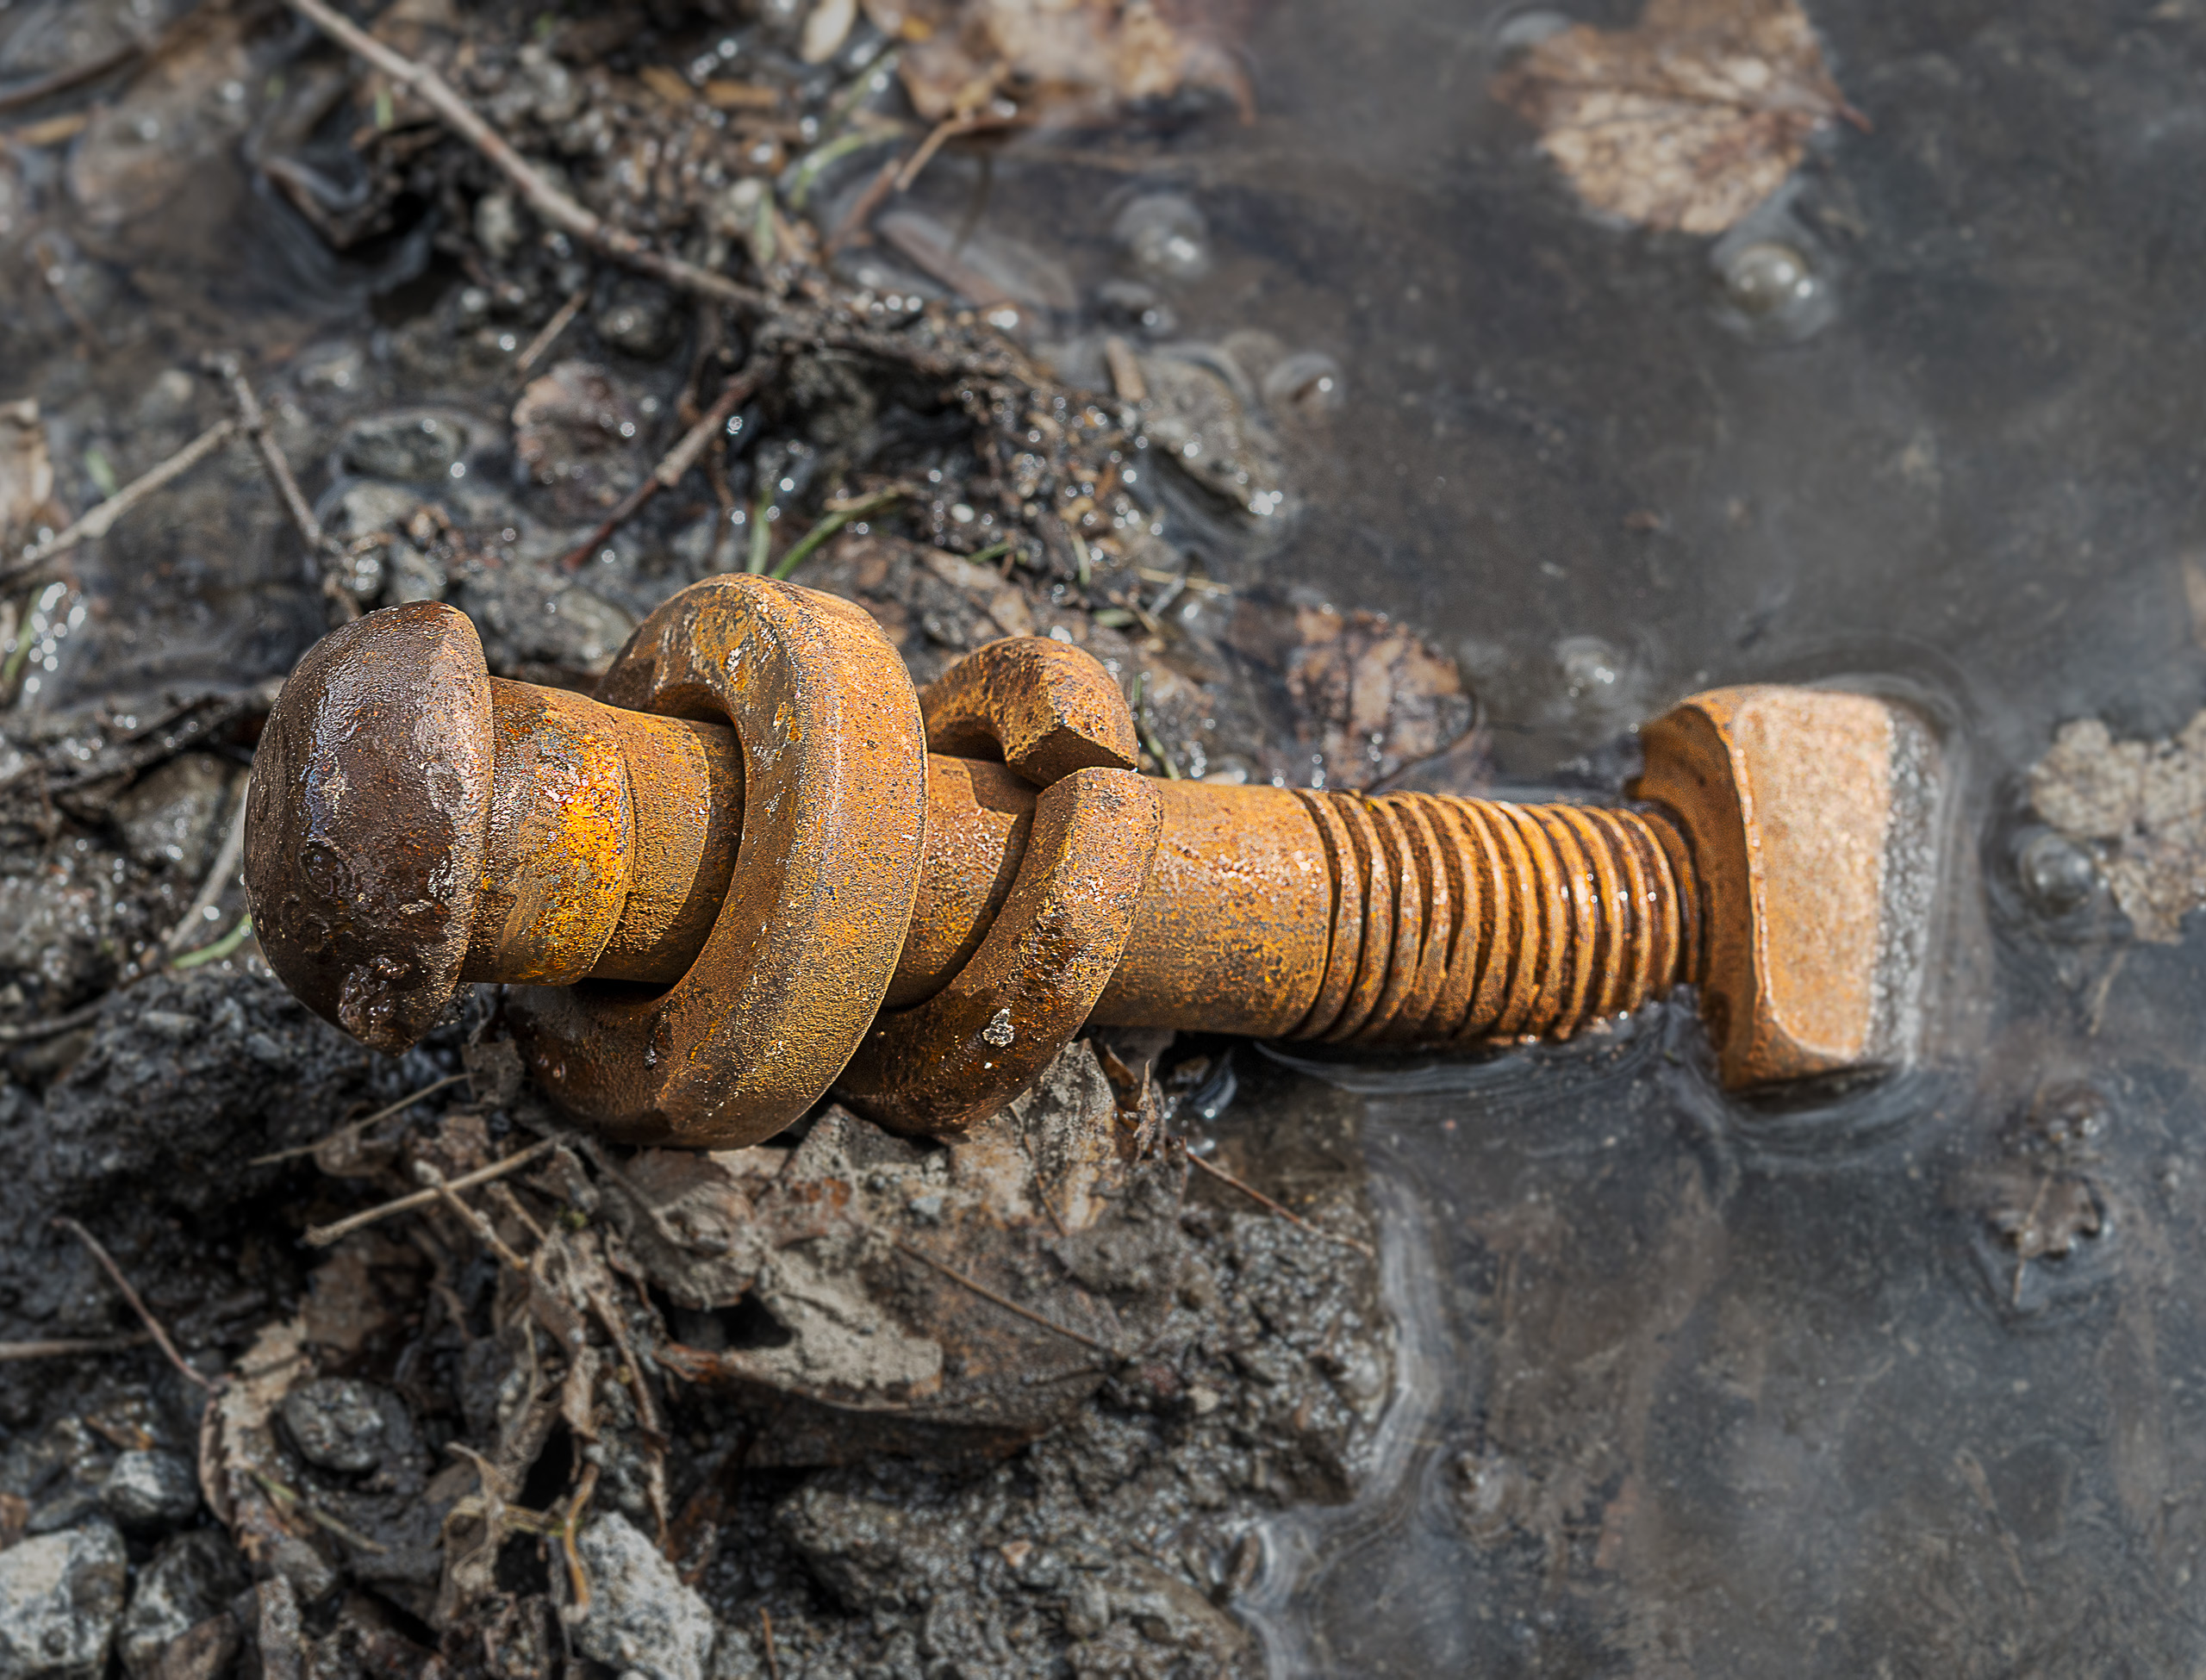 Aging, rusted bolt with nut and washers emerging from pond.